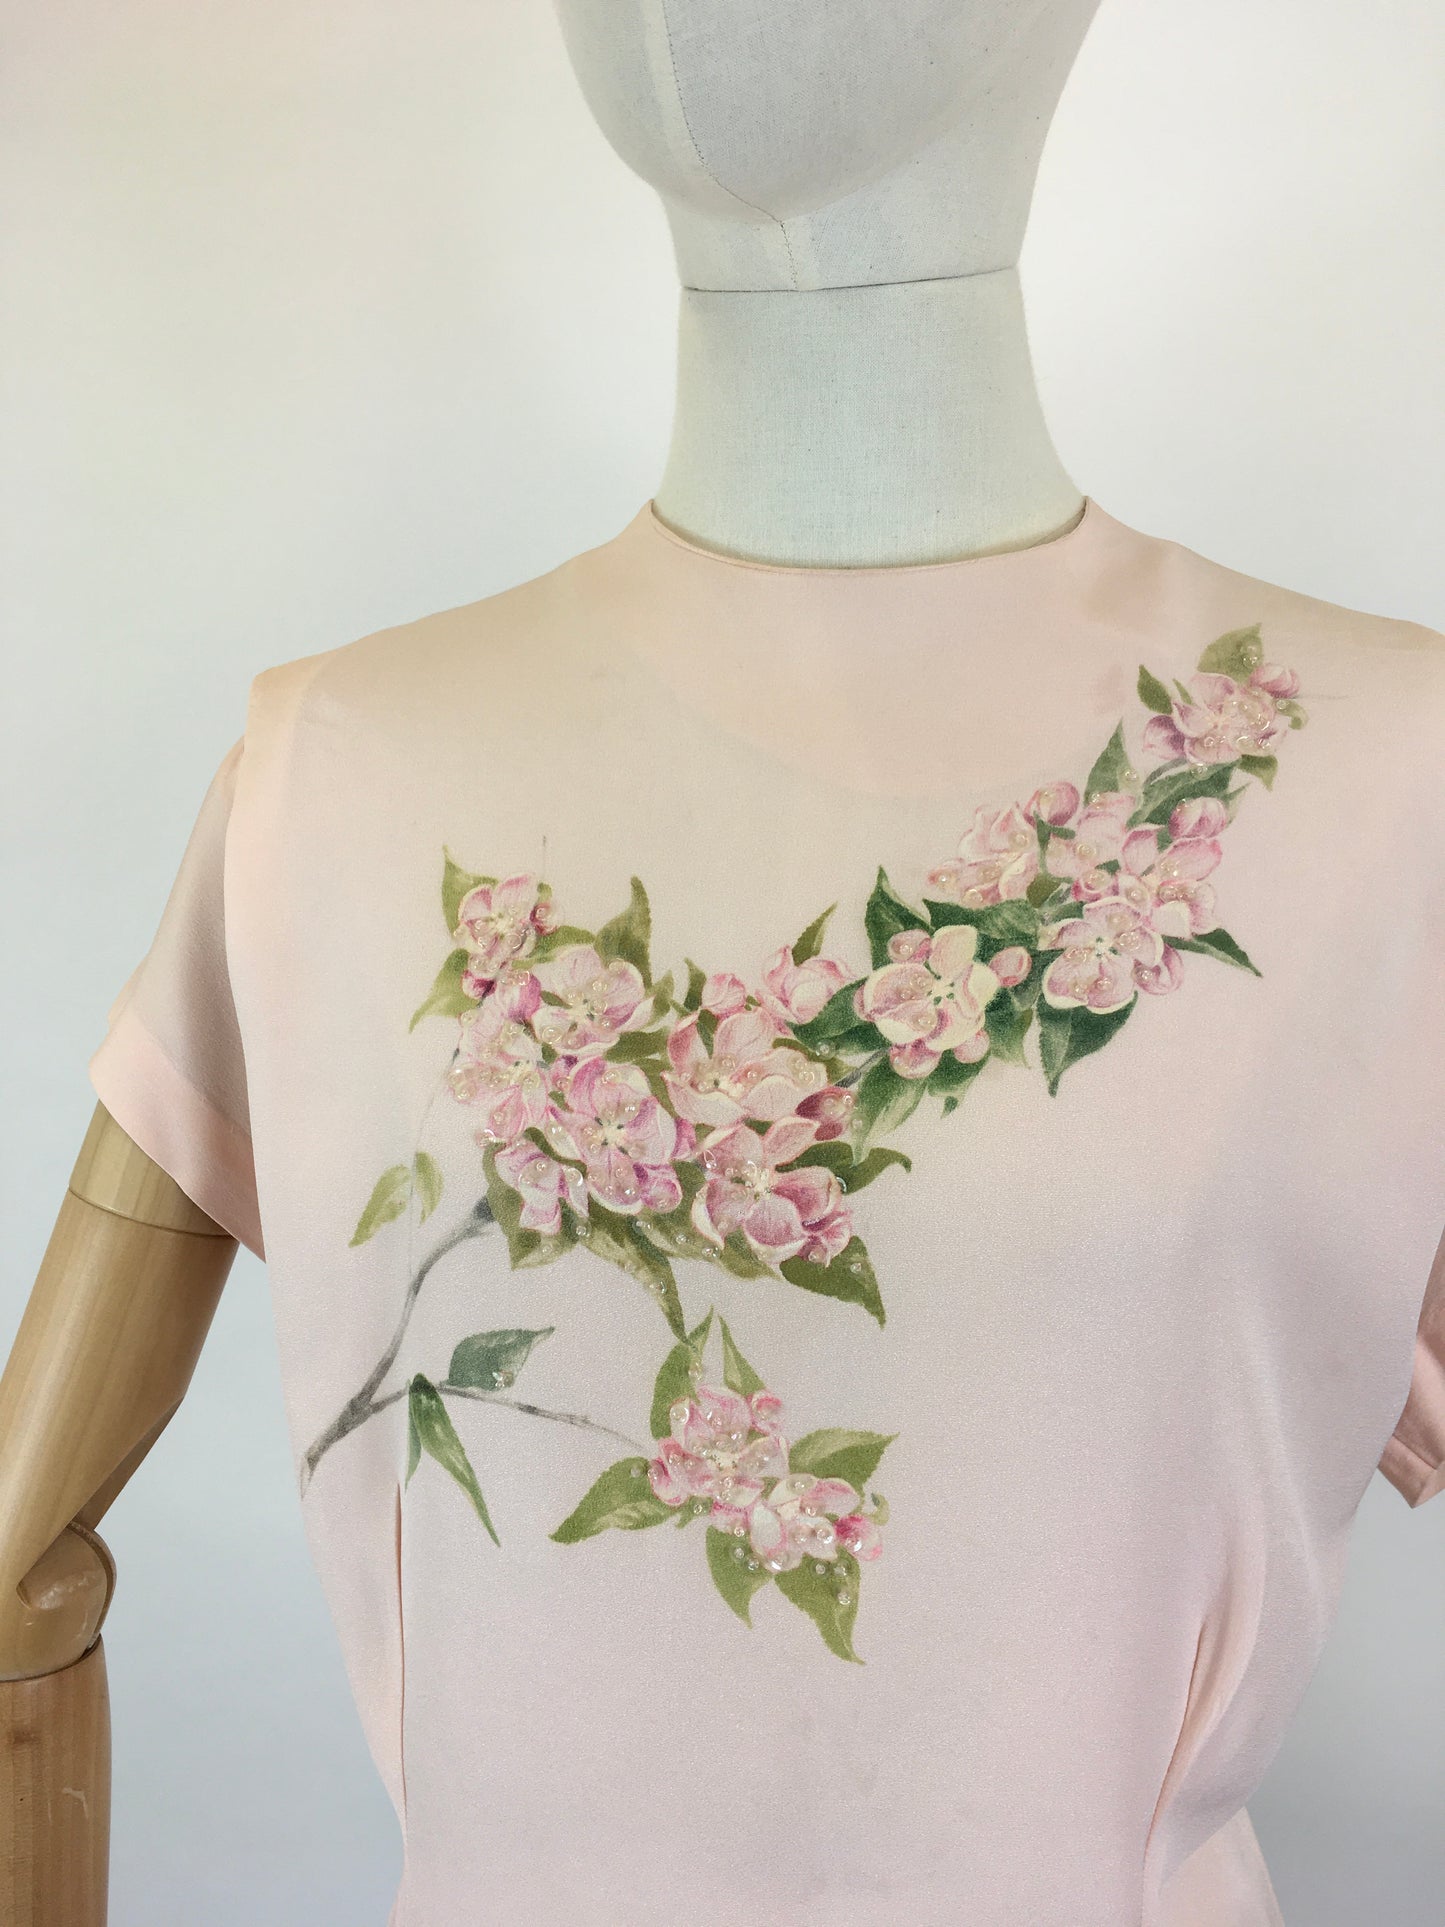 Original 1940’s Darling Rayon Blouse in Soft Peach - With Painted Floral & Beadwork Embellishments